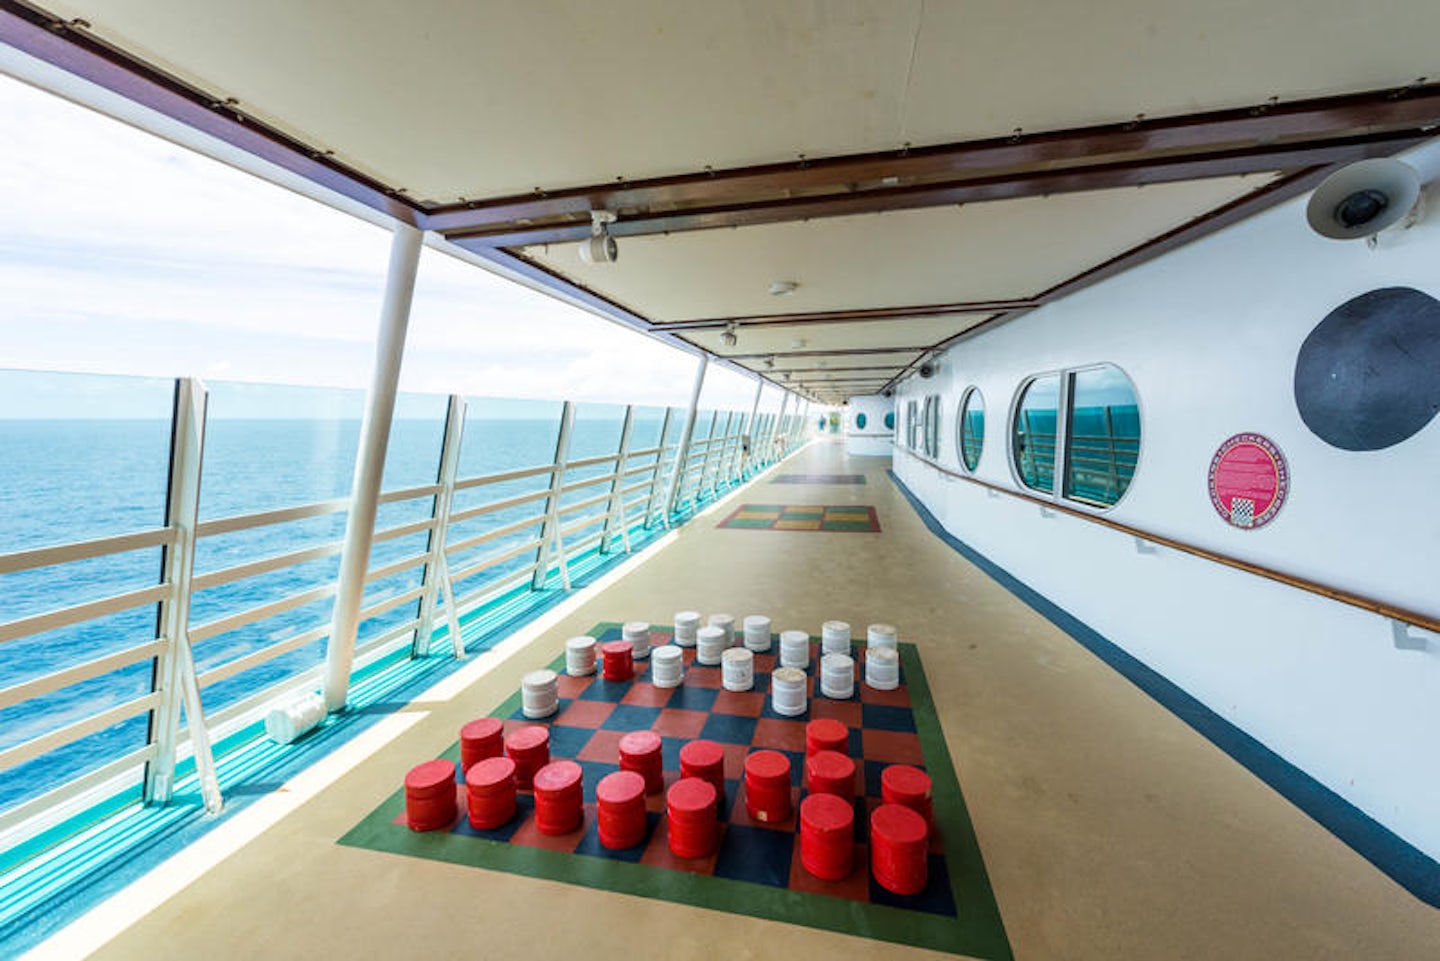 Deck Games on Adventure of the Seas